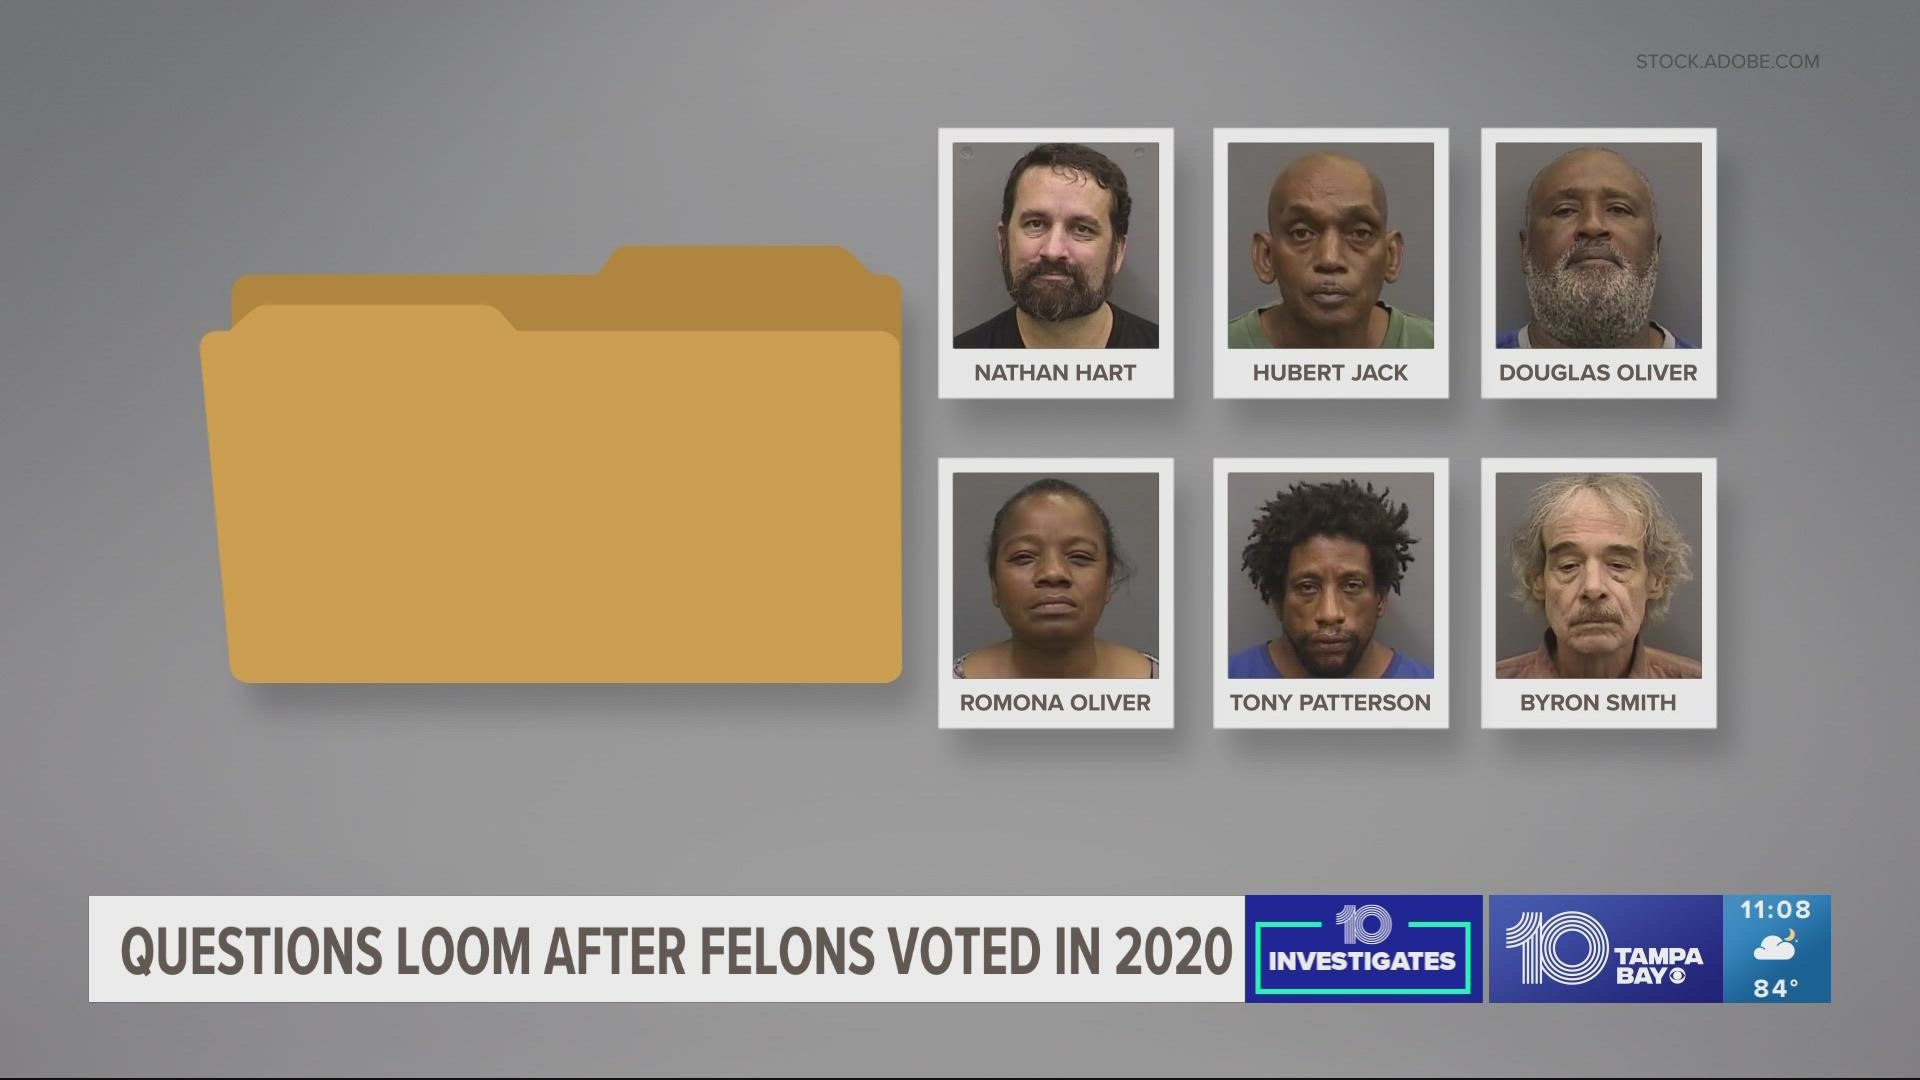 Six Hillsborough County residents with felony convictions face voter fraud charges. One man's attorney says his client was falsely accused.